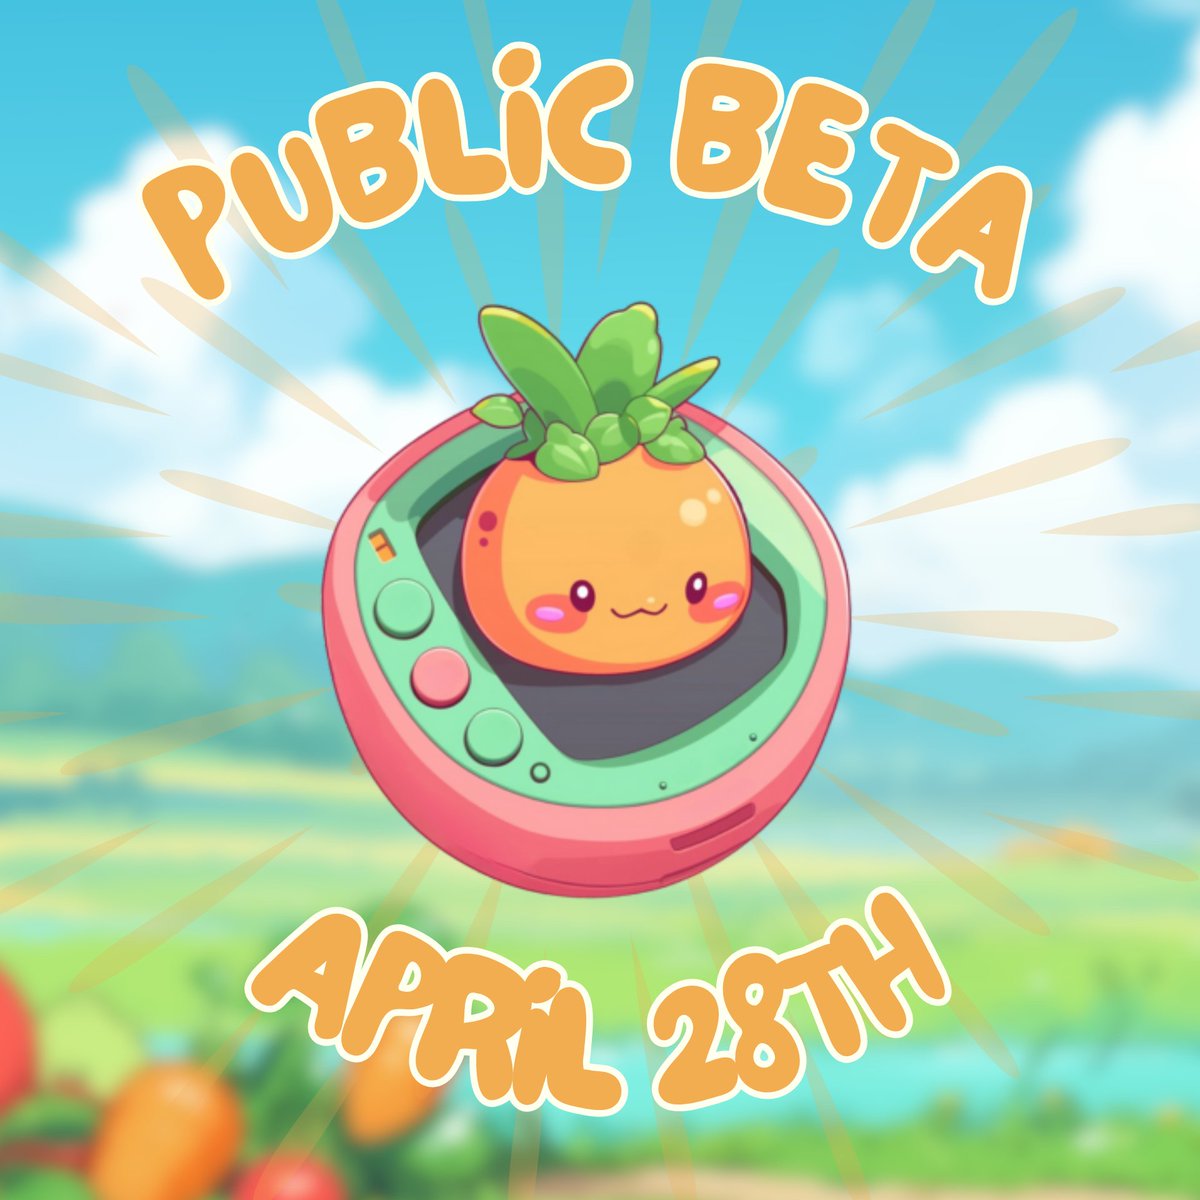 SAVE THE DATE! 🗓️🔥 Veggies Gotchi will be launched on April 28! 🥕 Are you ready to adopt your first pet vegetable? 🤩 Giving away 10 free mints in the comments to celebrate ⏬🎁